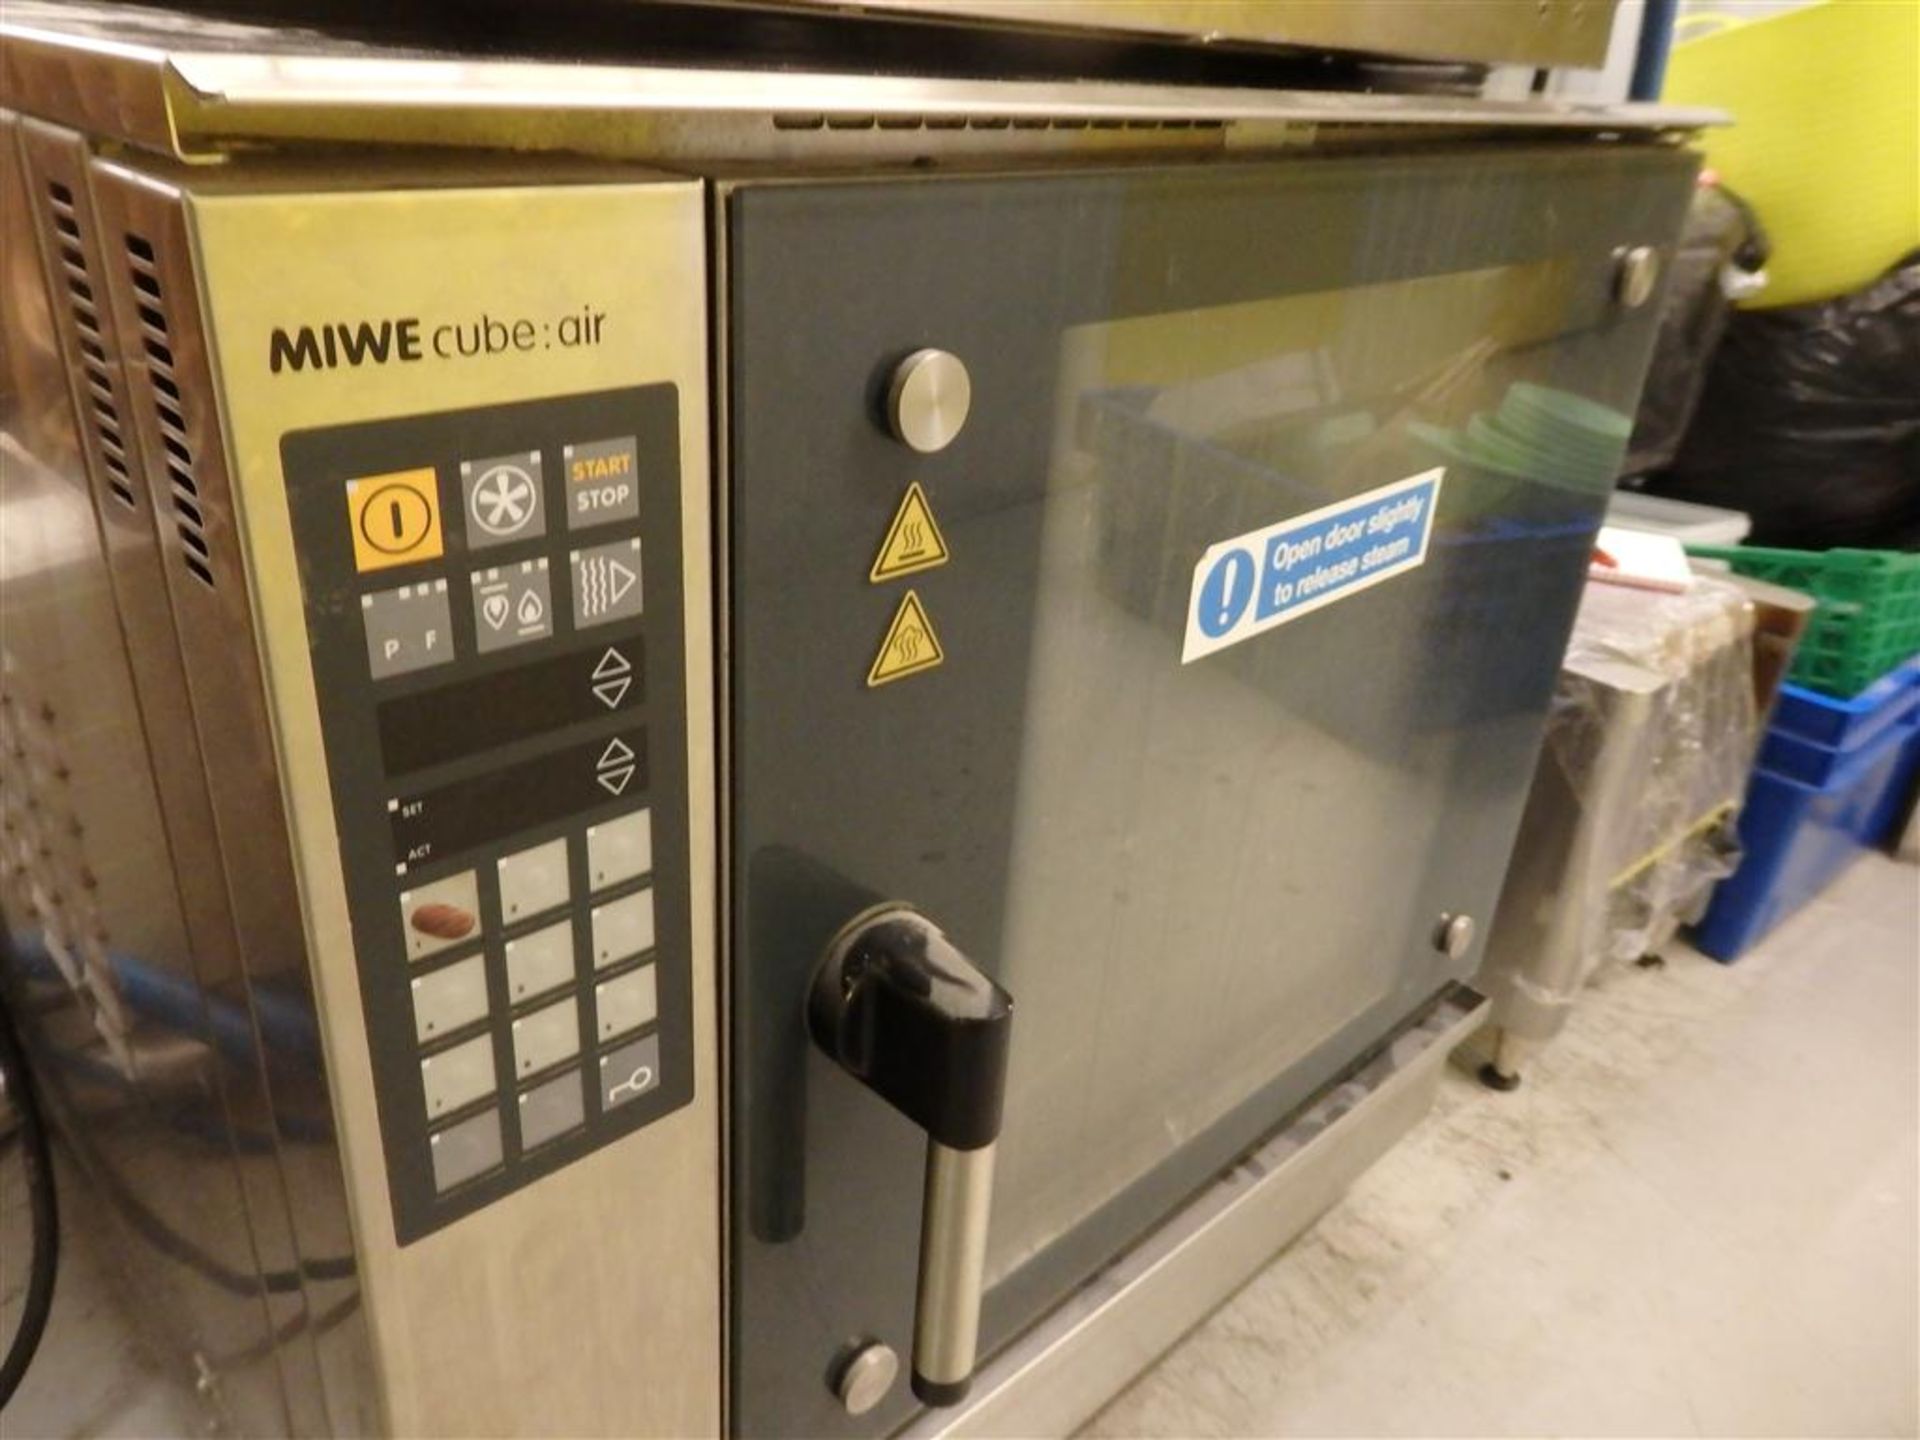 1 x MIWE Cube Air - Convection Baking Oven - 81cm x 82cm x height 83.5cm - Upmarket London - Image 3 of 10